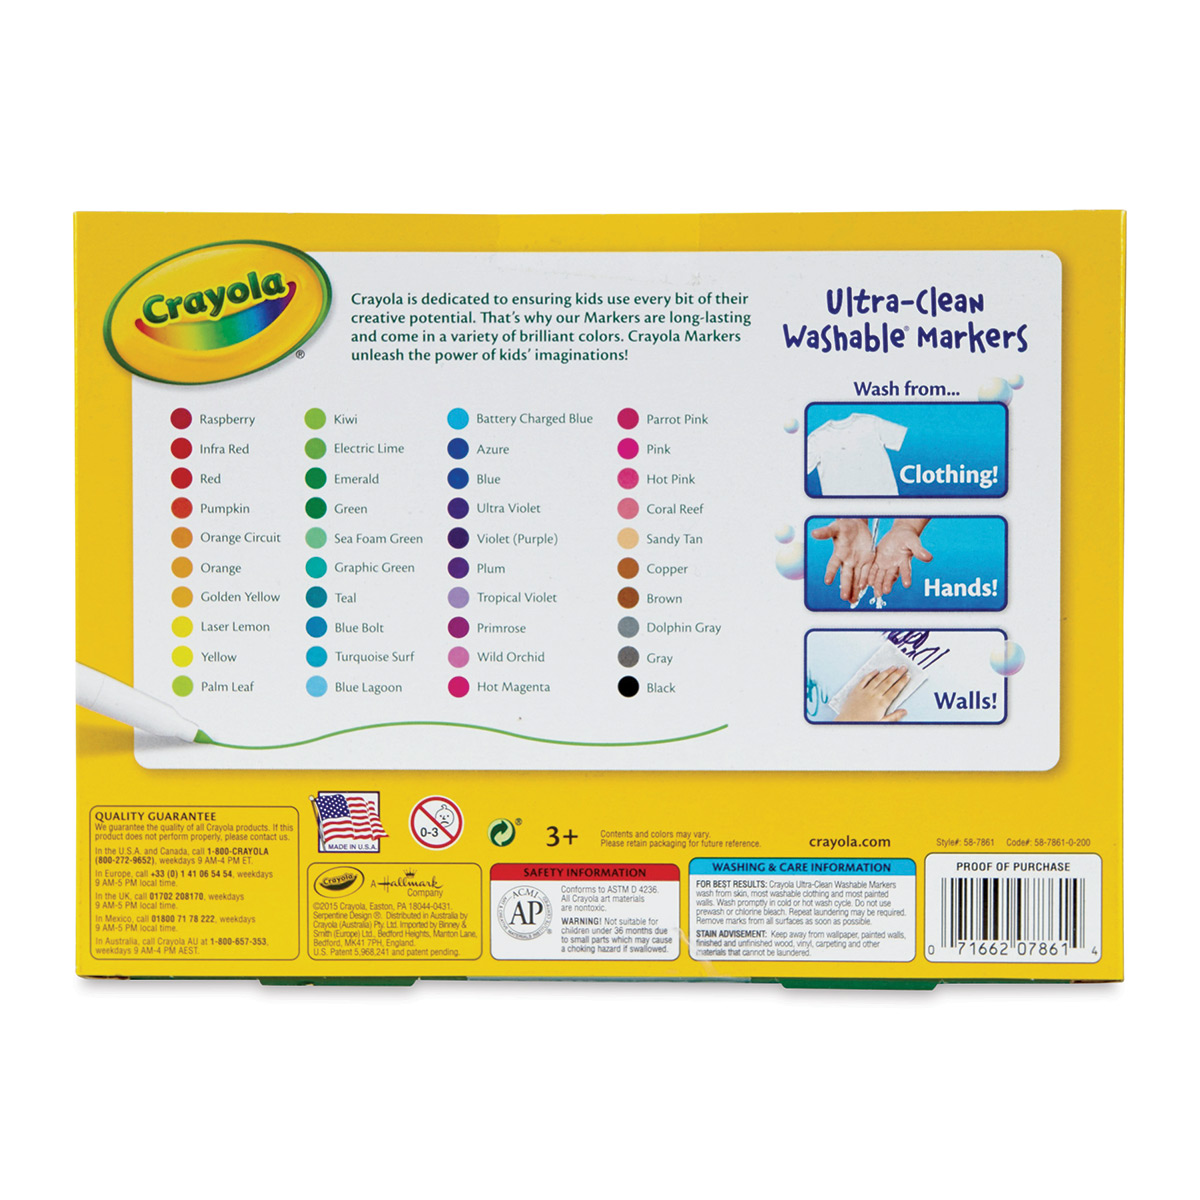 Crayola Ultra-Clean Washable Markers - 10 Assorted Colors, Thin Line,  Classpack of 200